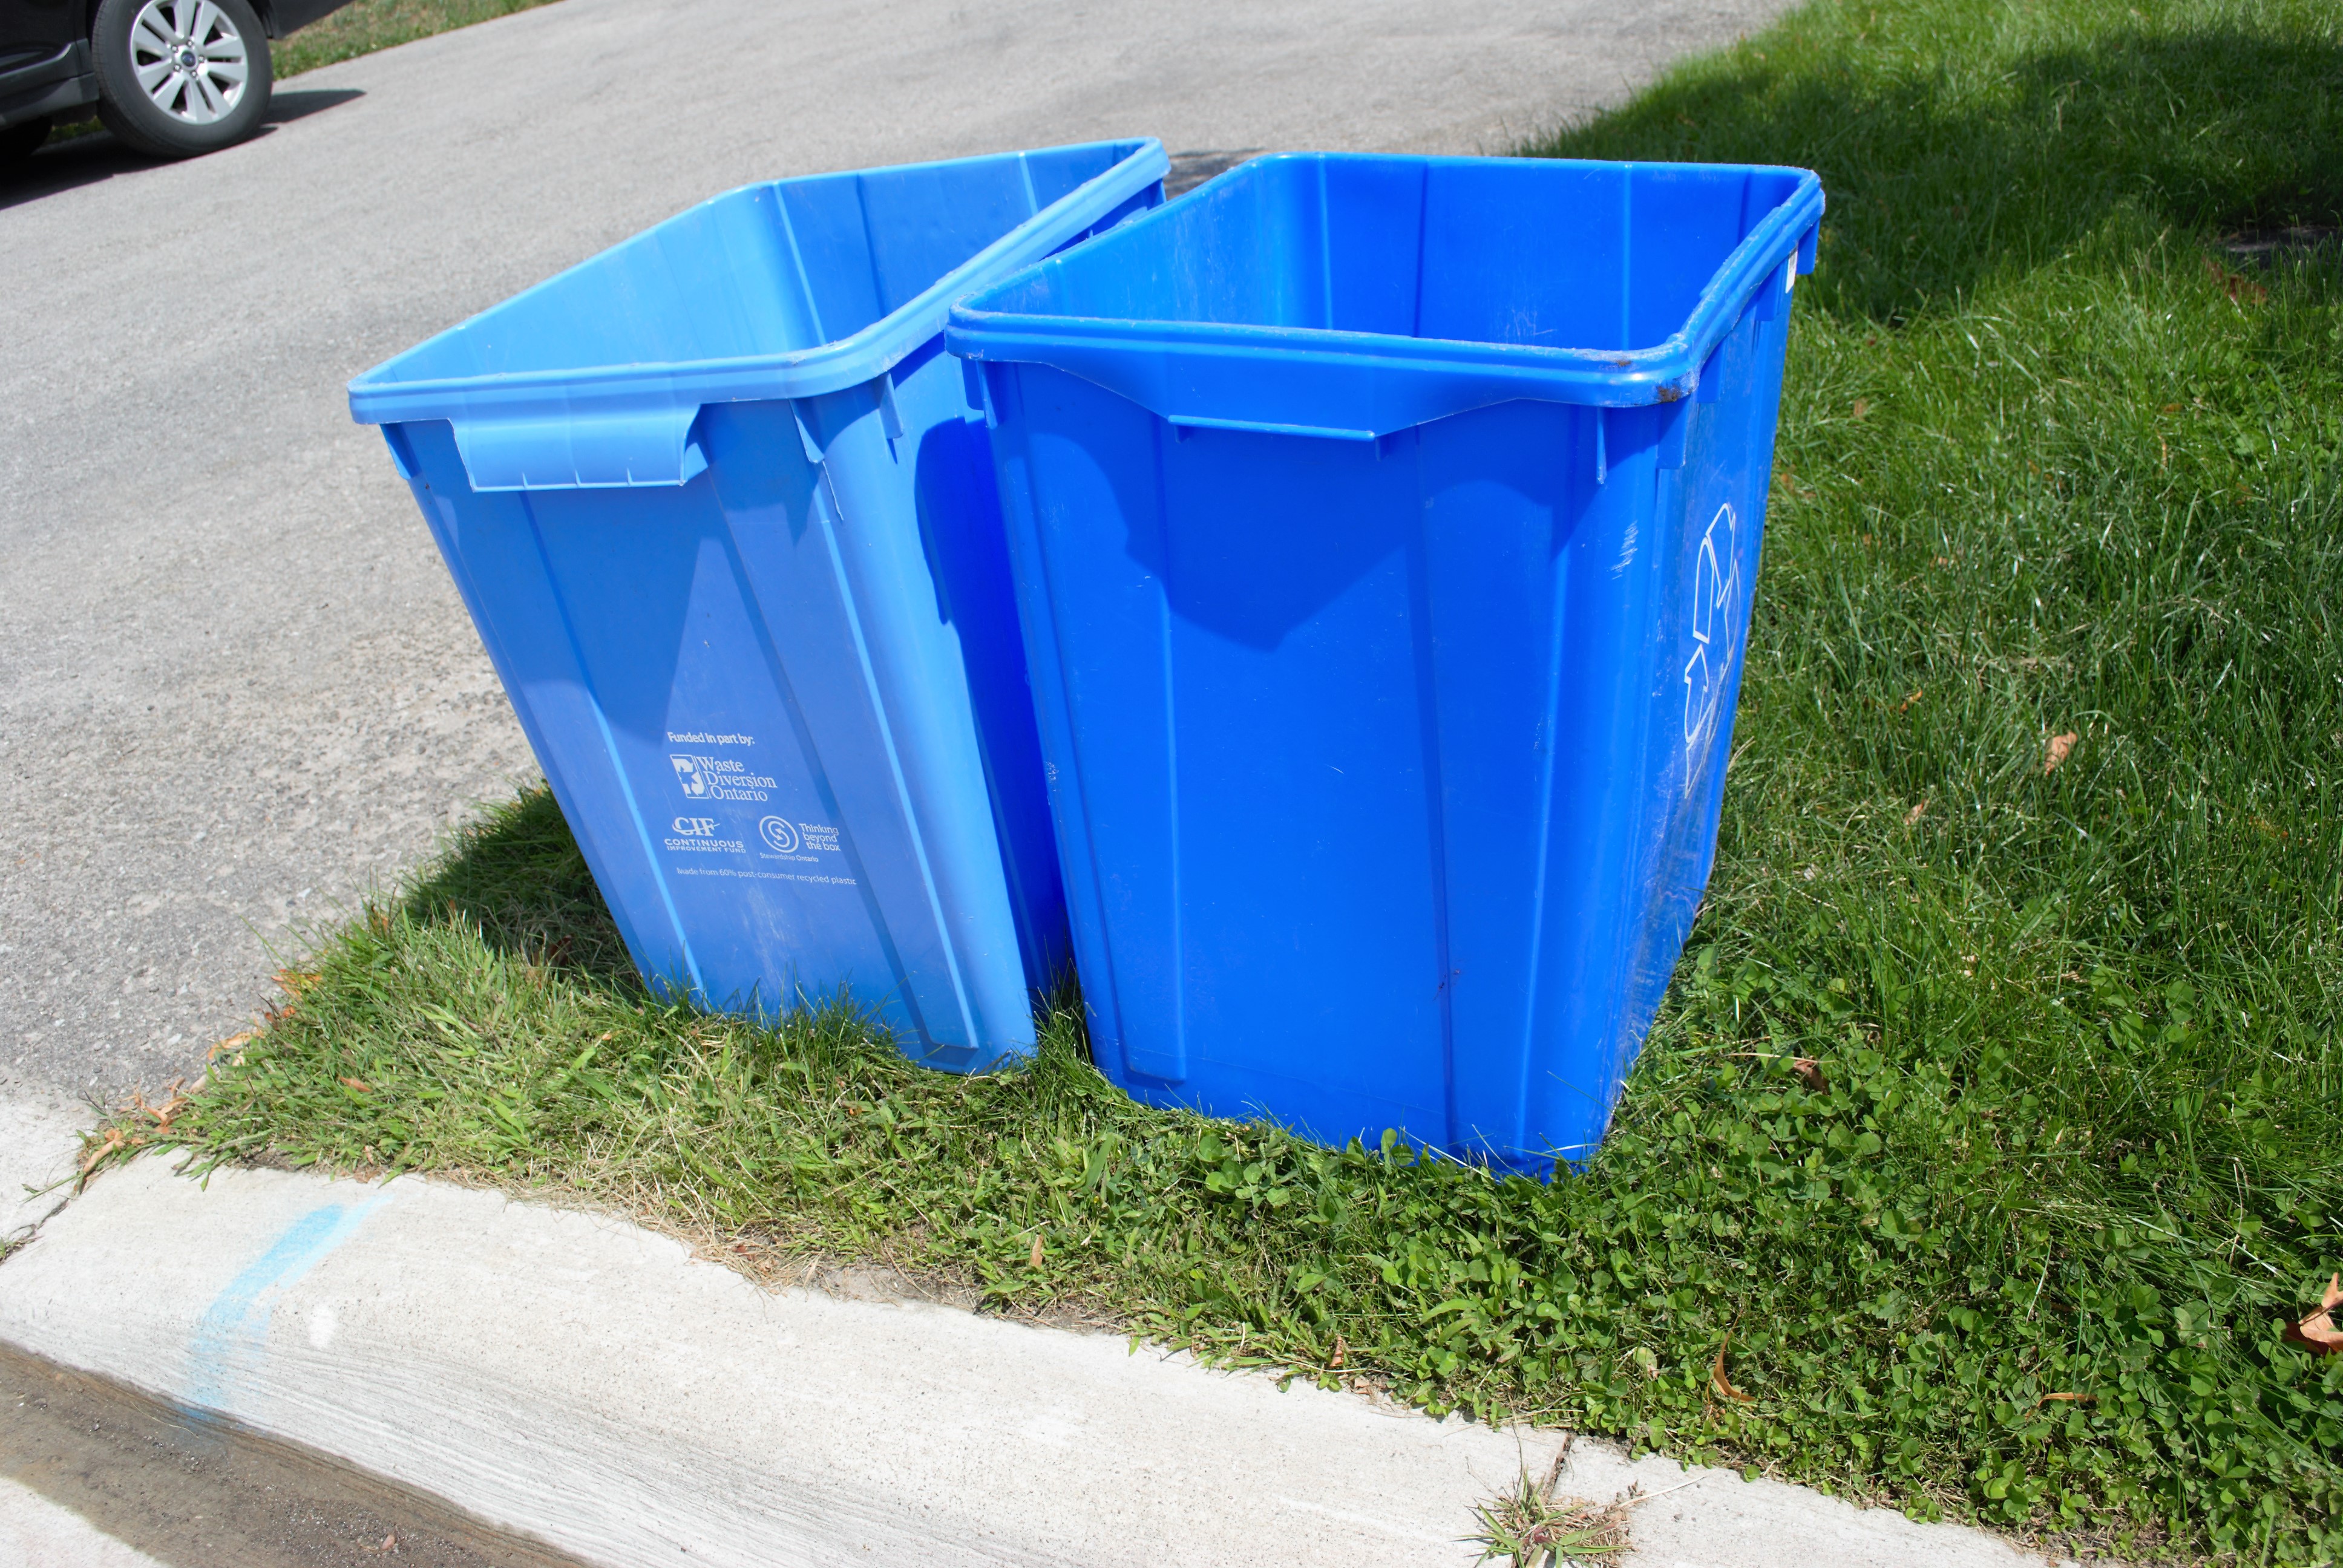 https://www.vmcdn.ca/f/files/barrietoday/images/county-of-simcoe/2019-08-15-recycling-jo-001.jpg